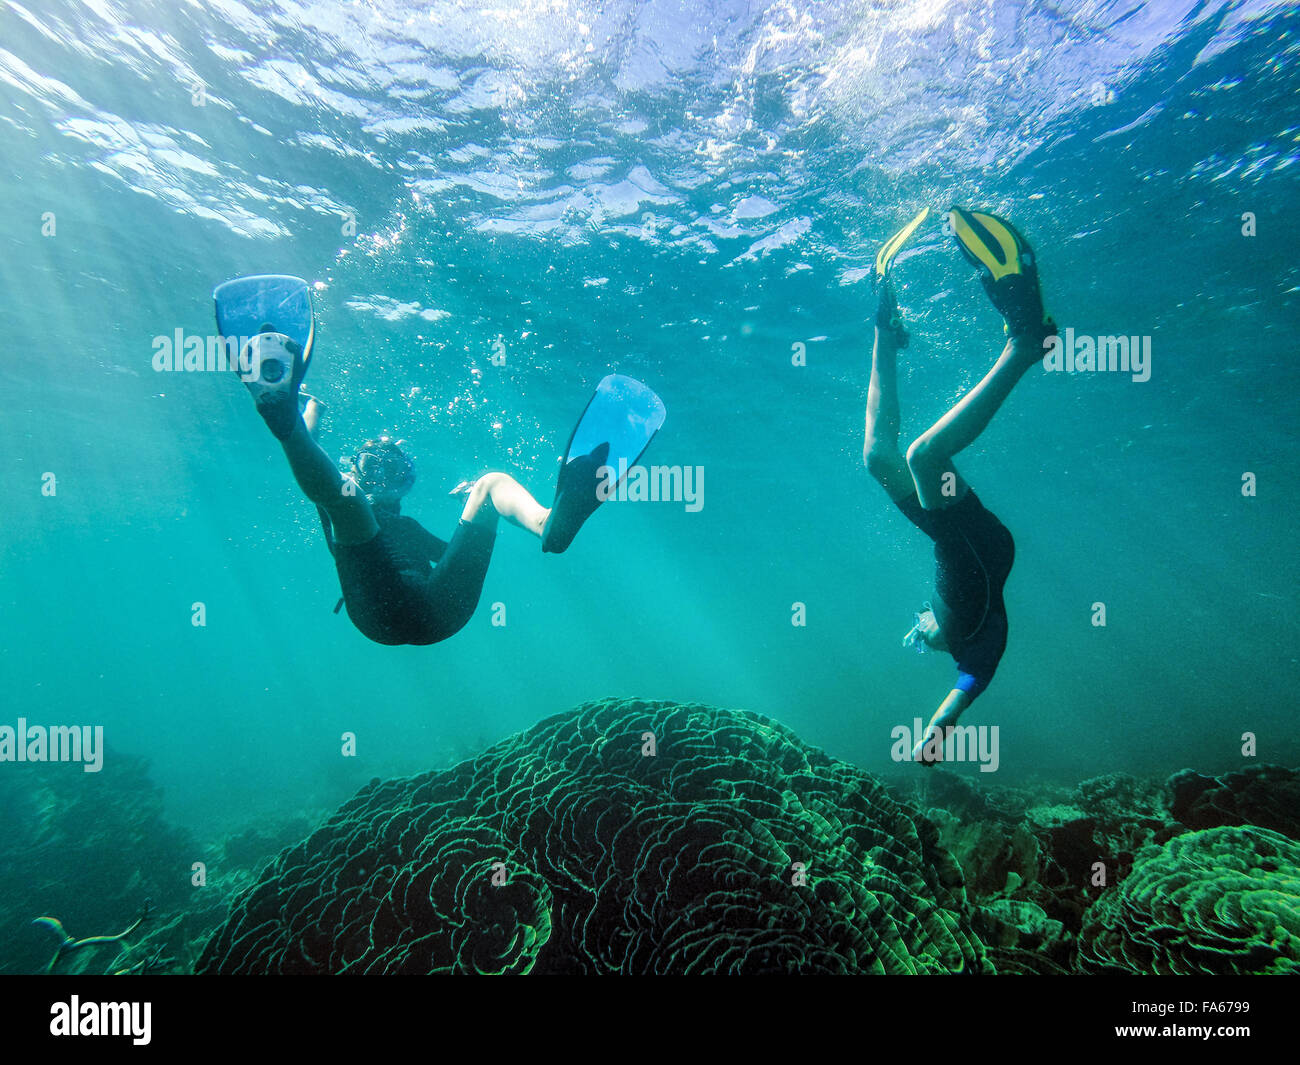 Boy and girl swimming underwater, Exmouth, Western Australia, Australia Banque D'Images